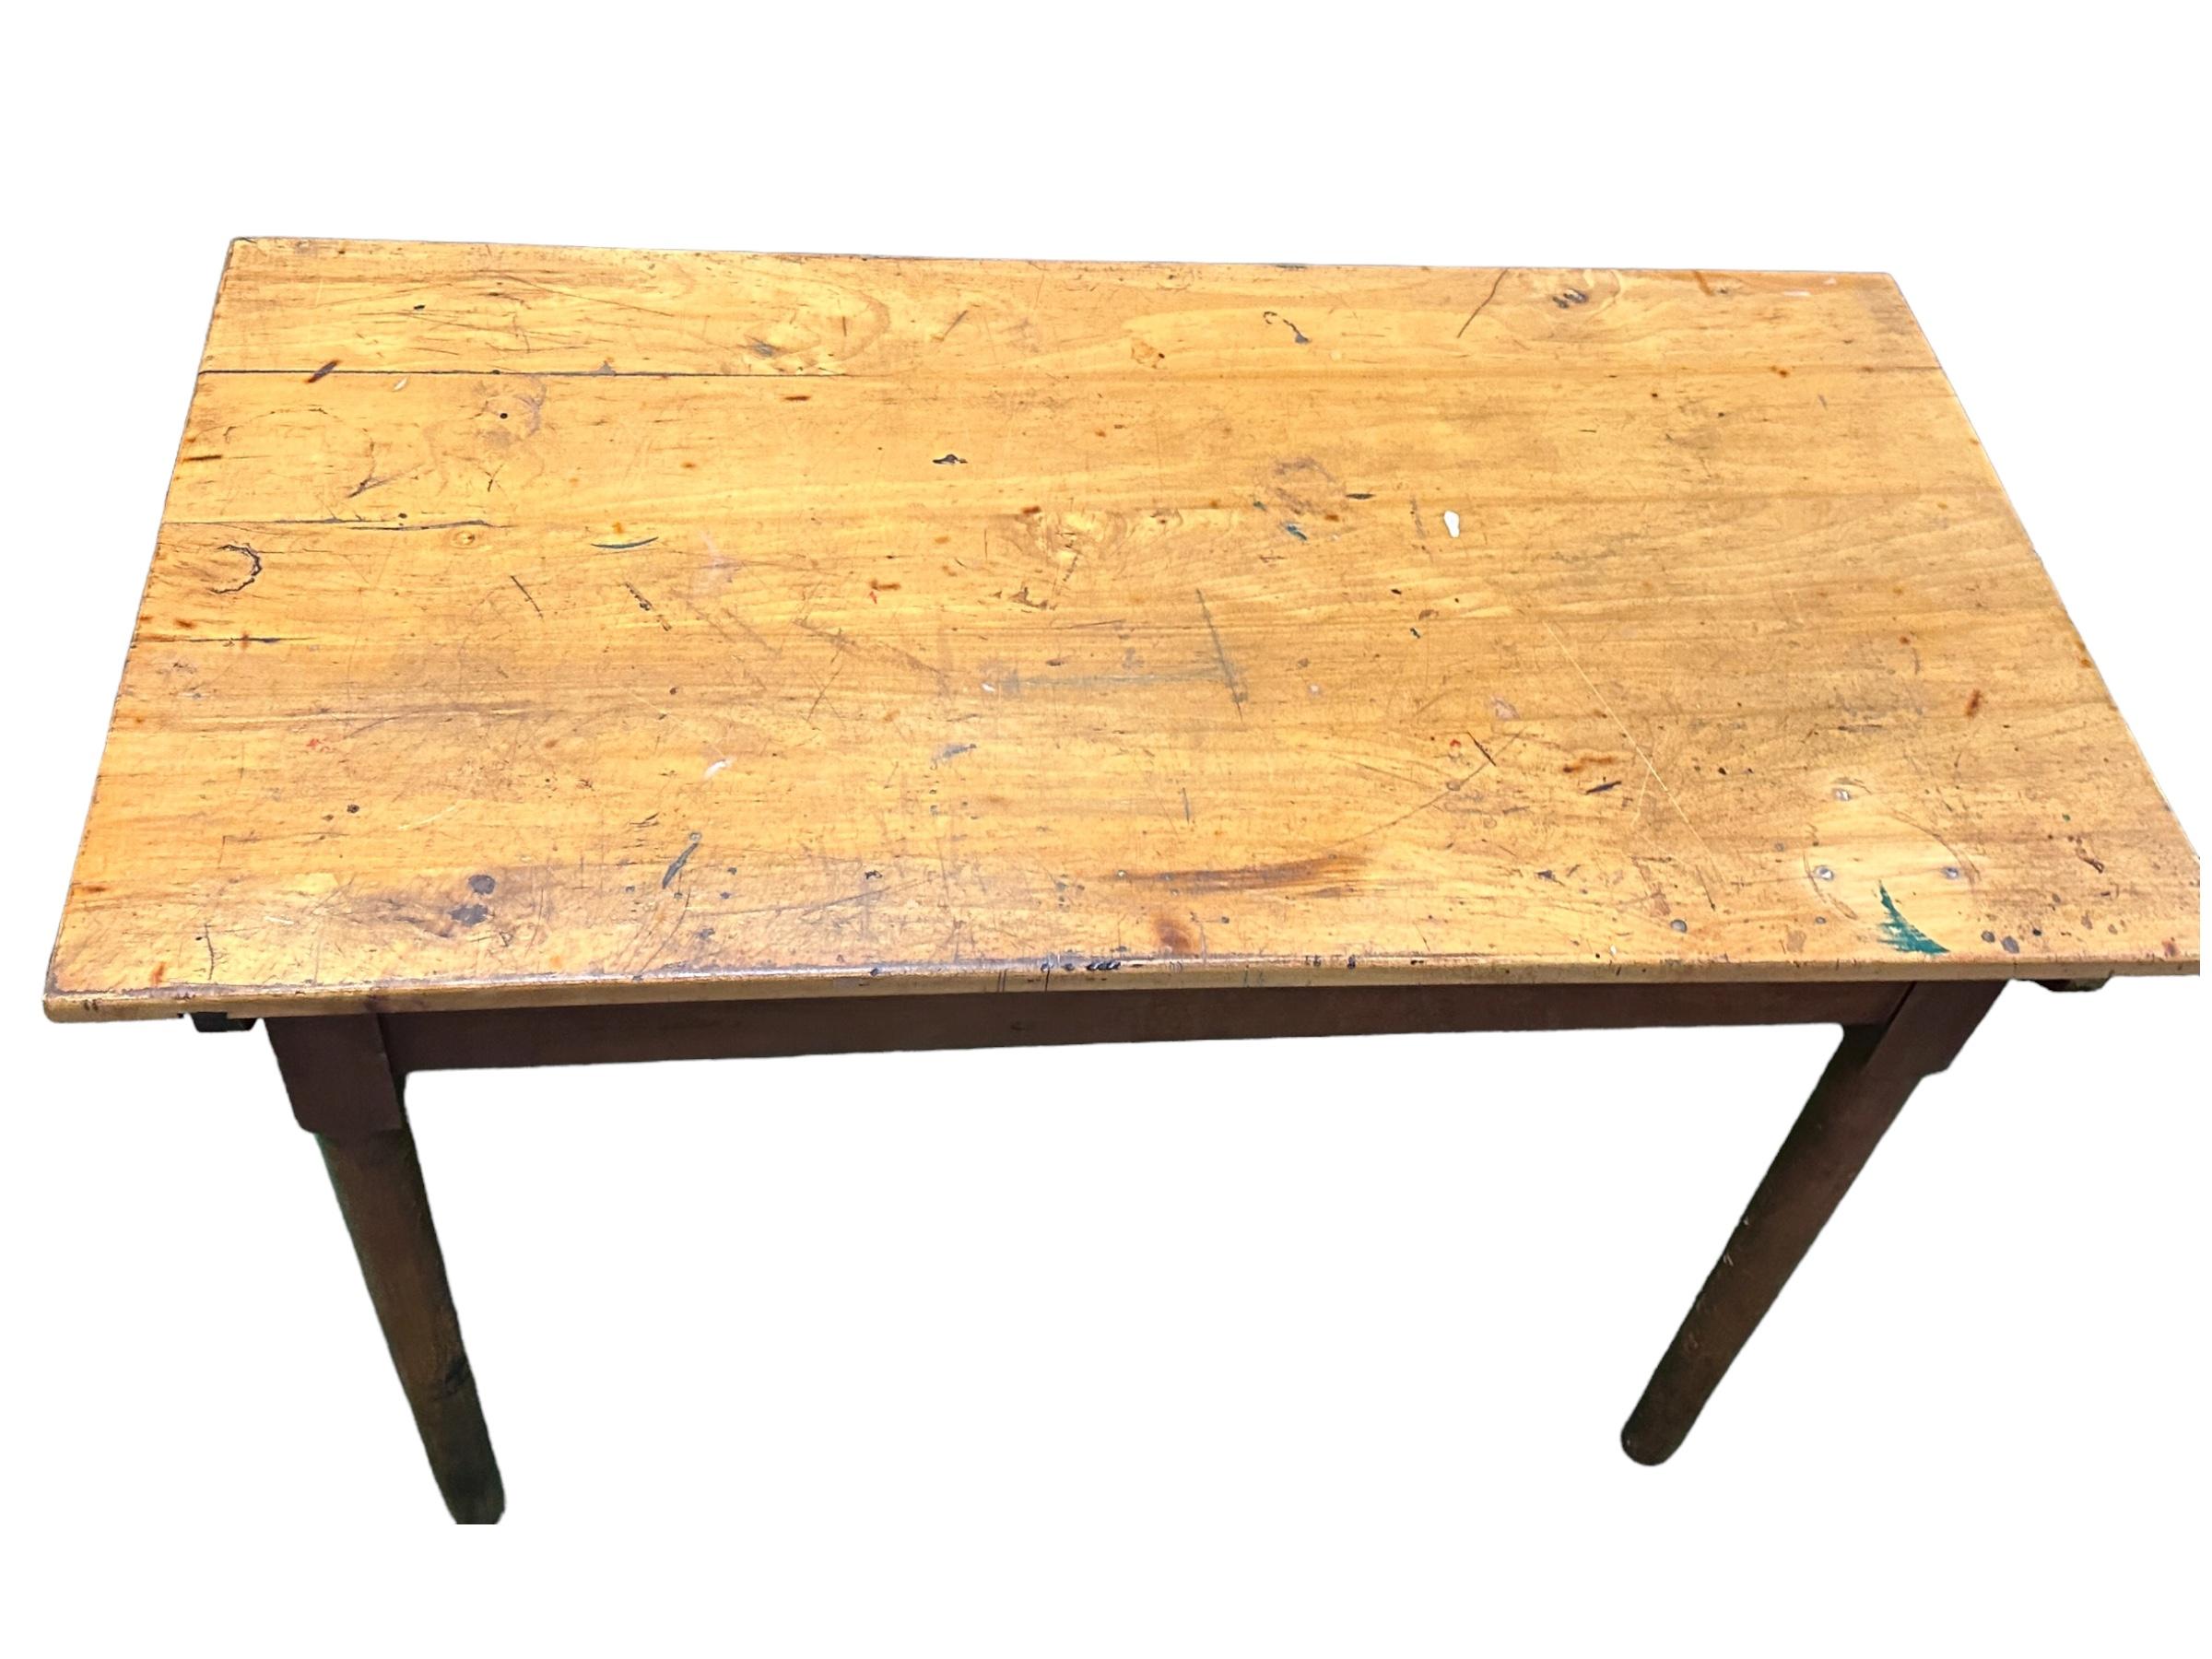 Hand-Crafted Folk Art Cottage Farm Tavern Table out of Humbser Brewery Fürth Bavaria 1950s For Sale